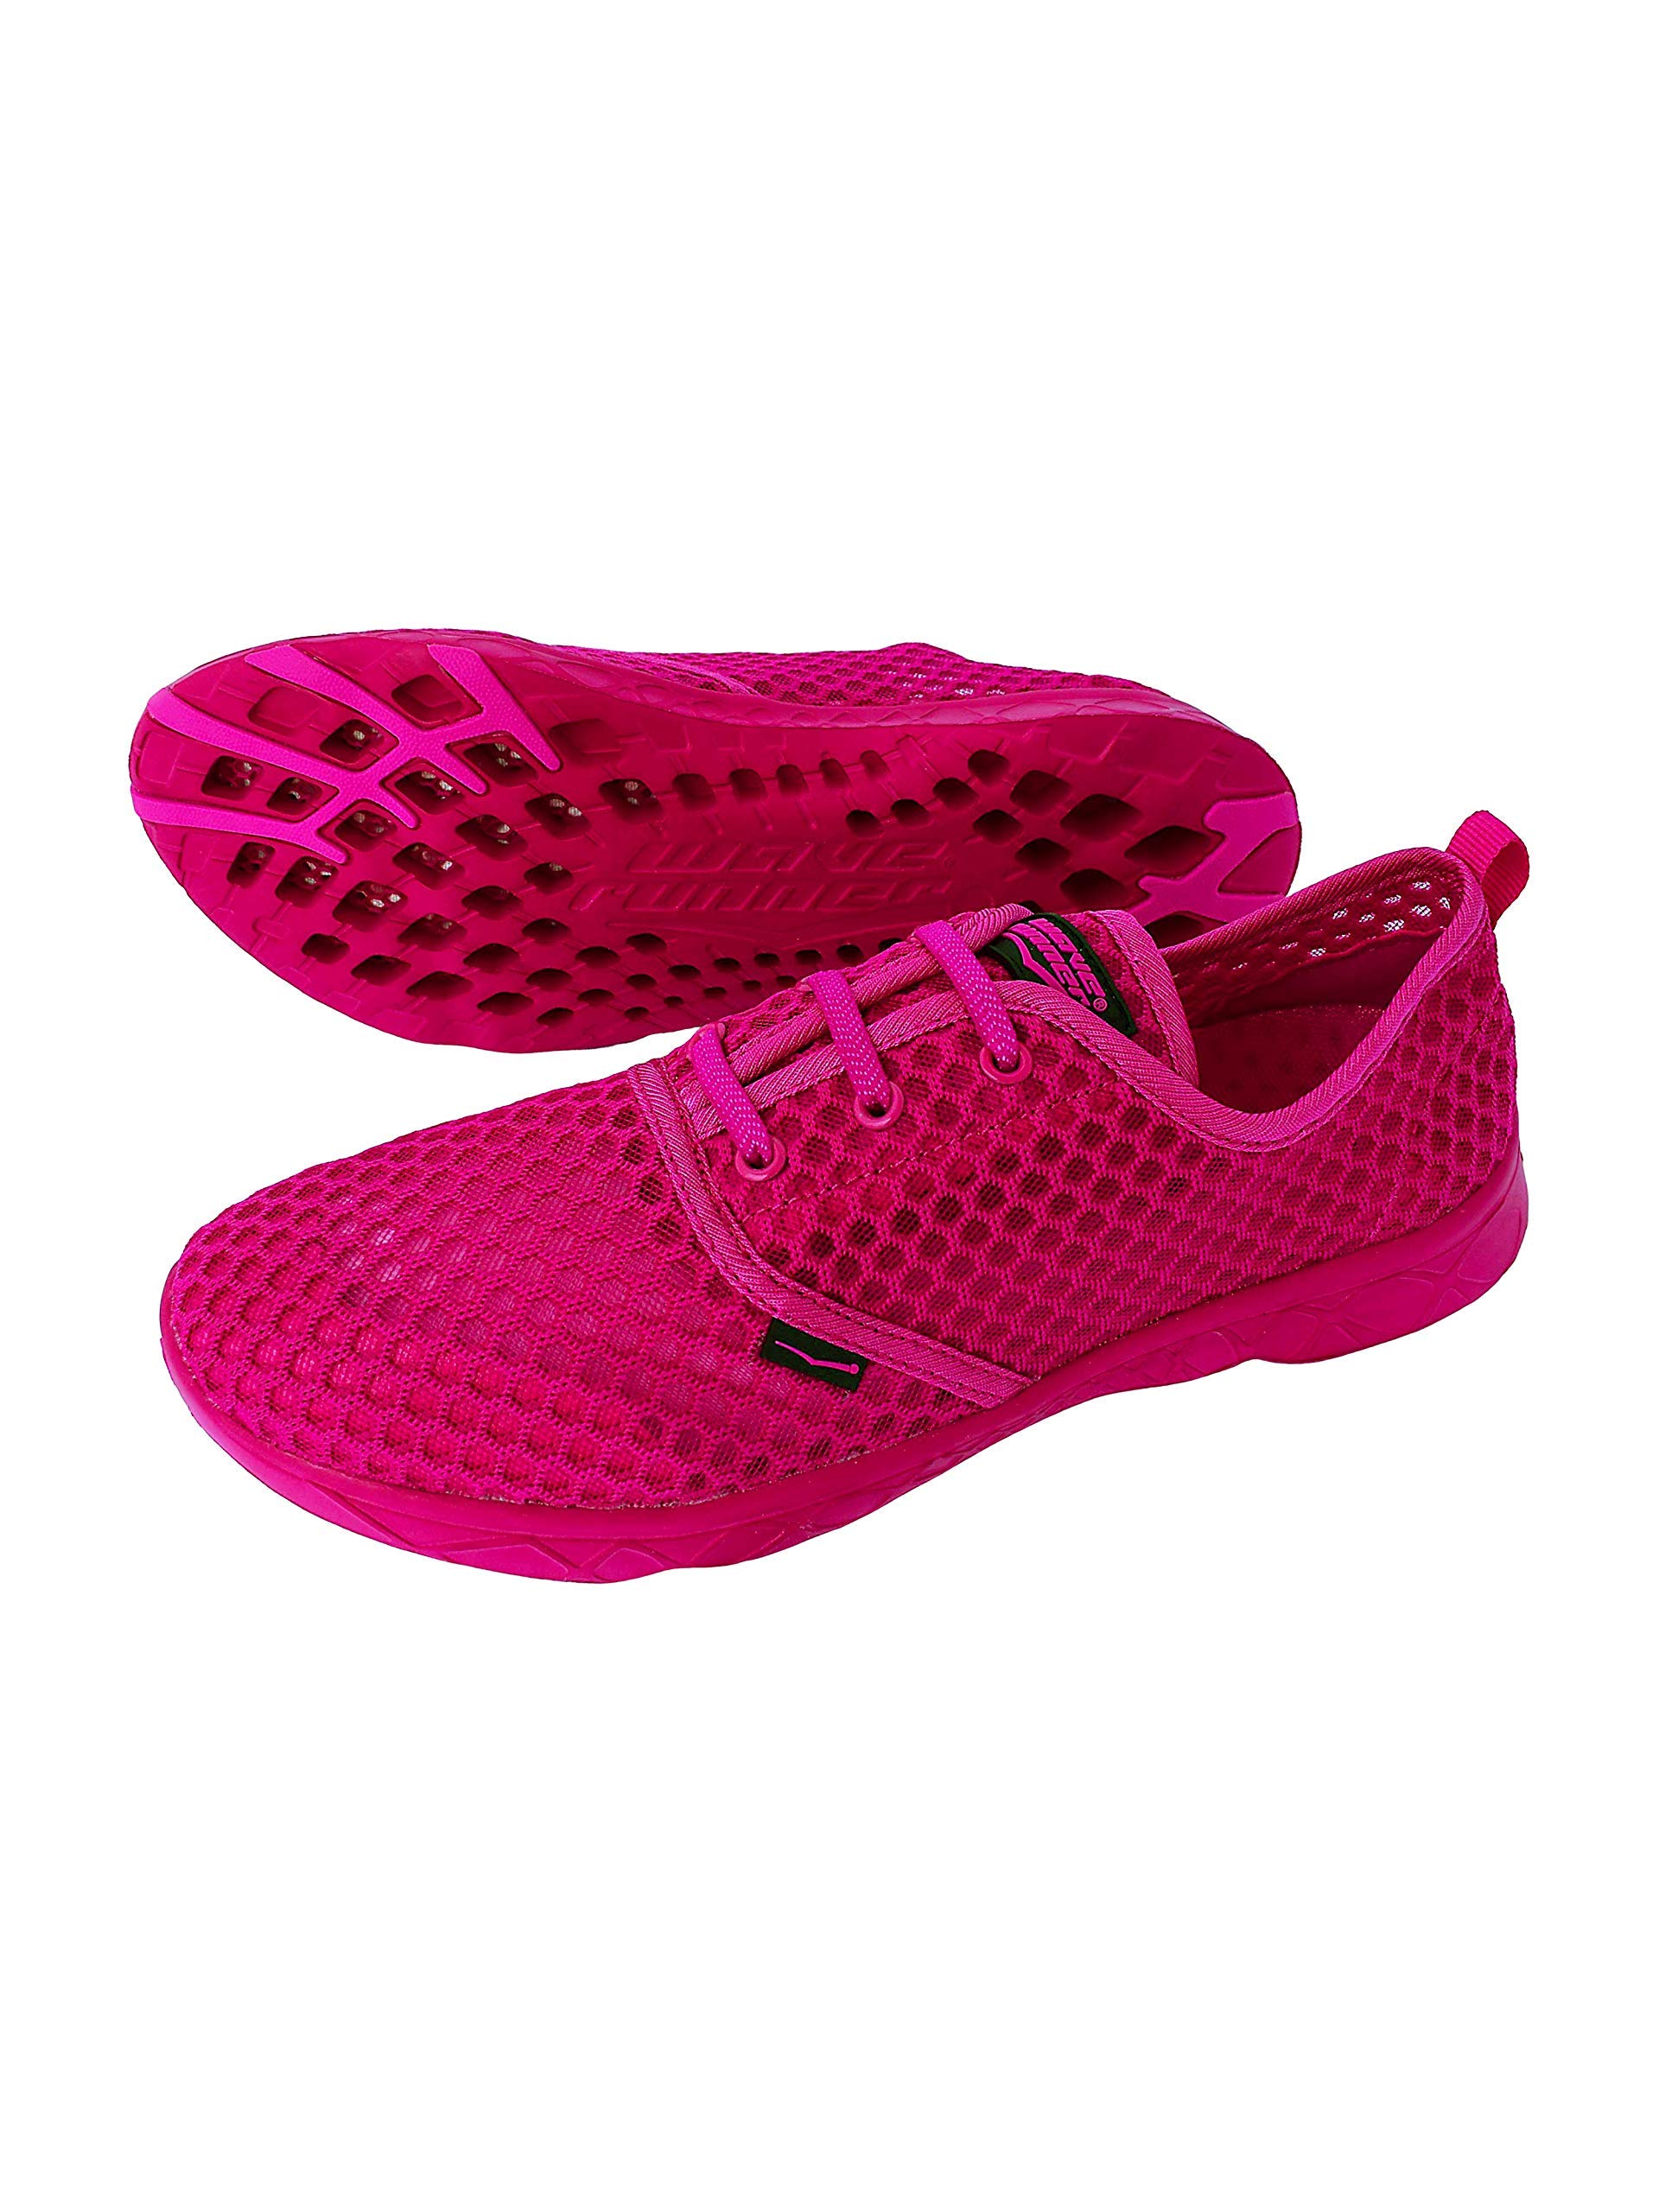 Wave Runner Womens Water Shoes (Pink, Numeric_9)